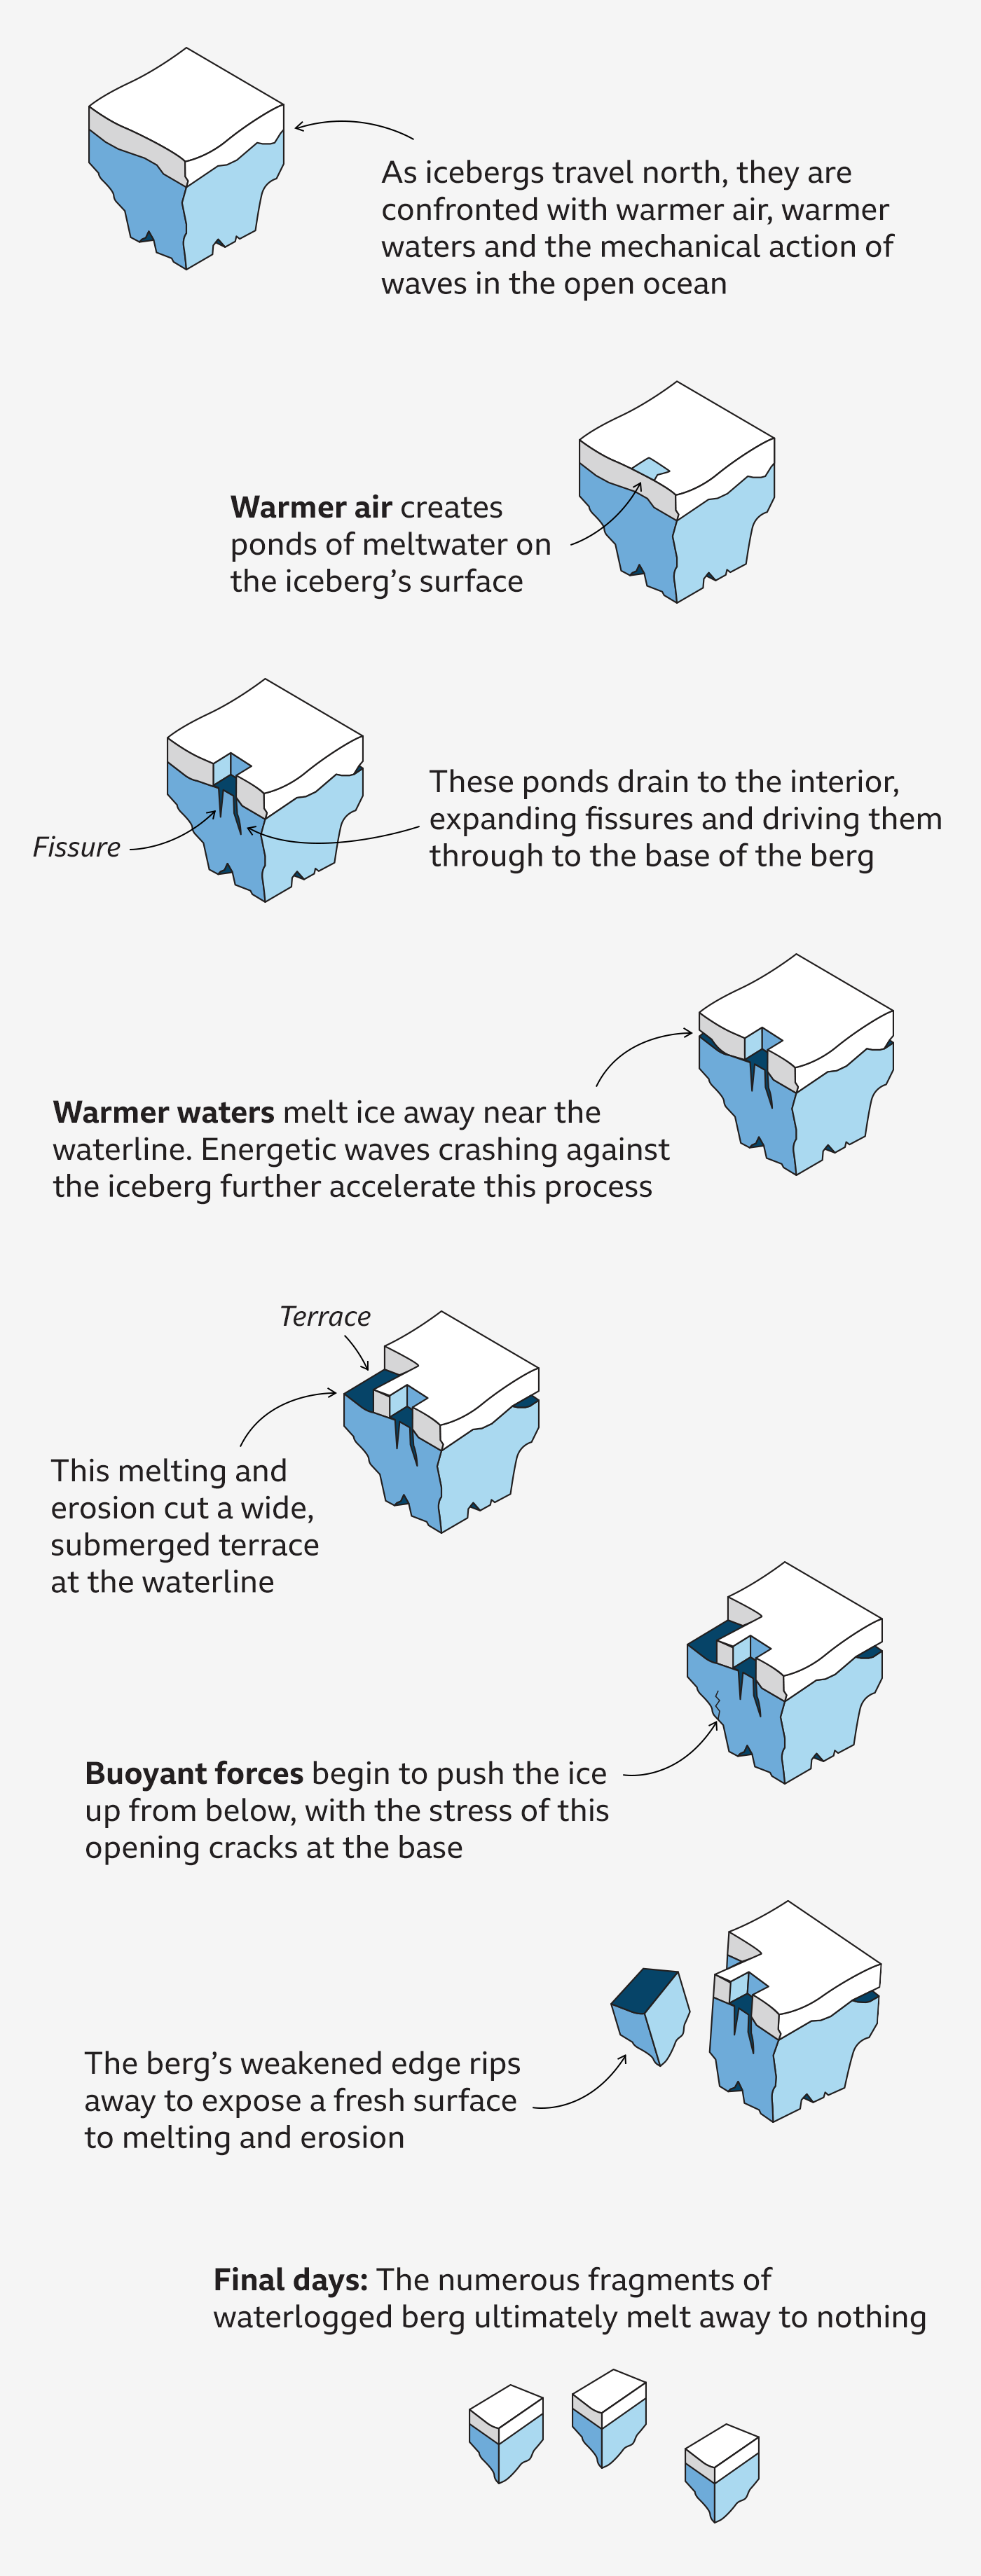 A graphic explaining the process that leads to icebergs breaking down. Warmer air and warmer waters cause parts of the iceberg to collapse